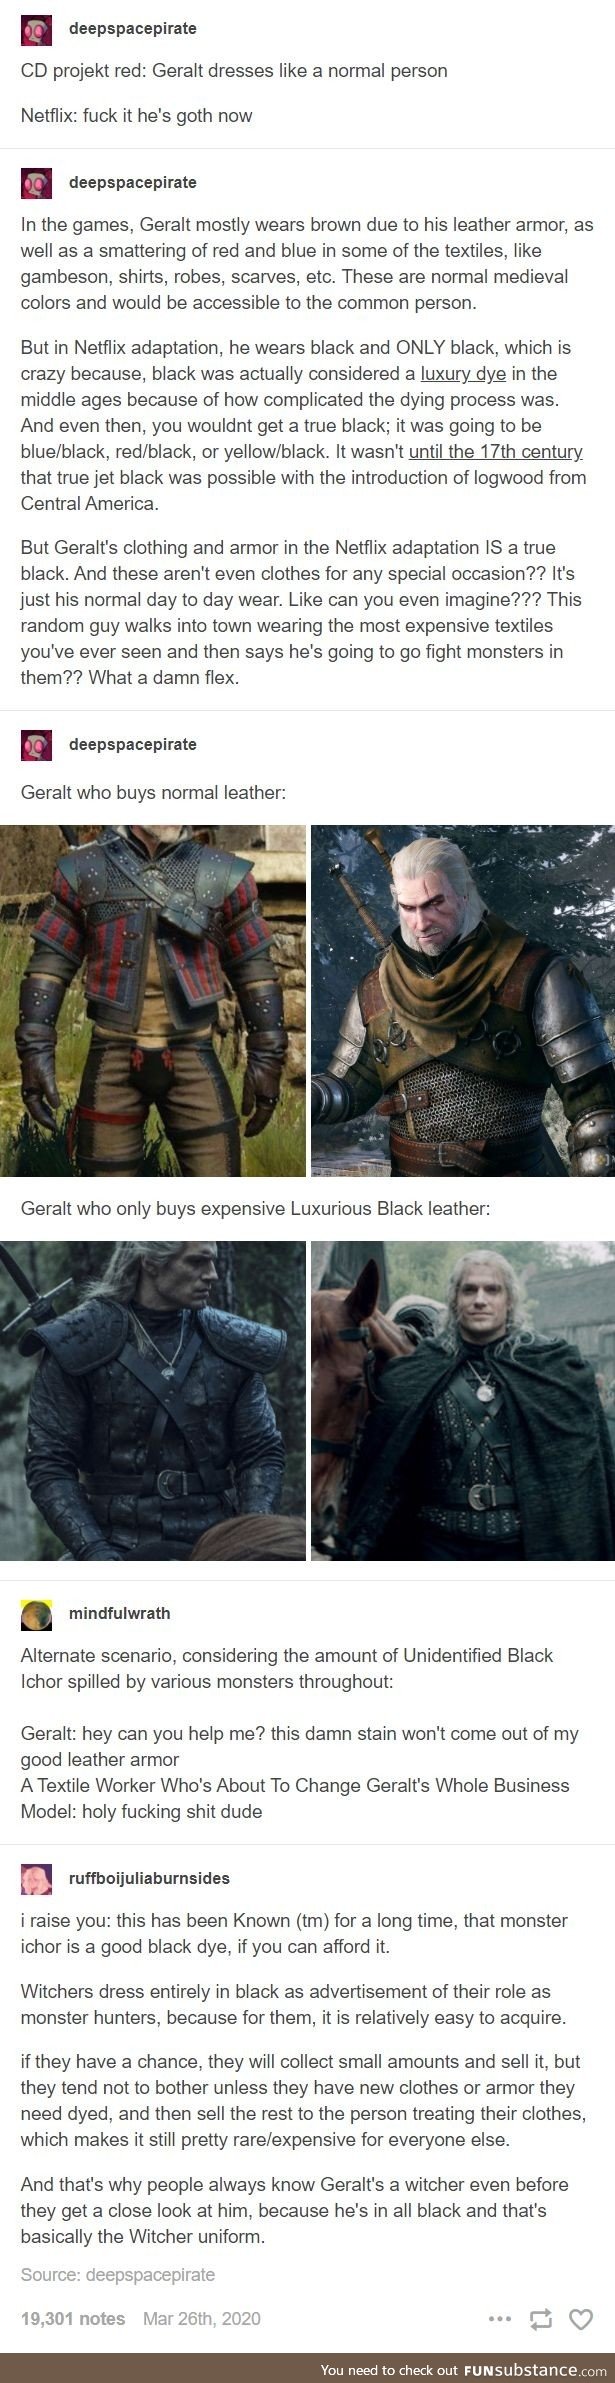 Stop tossing coins to your witcher - he's got expensive black leather already